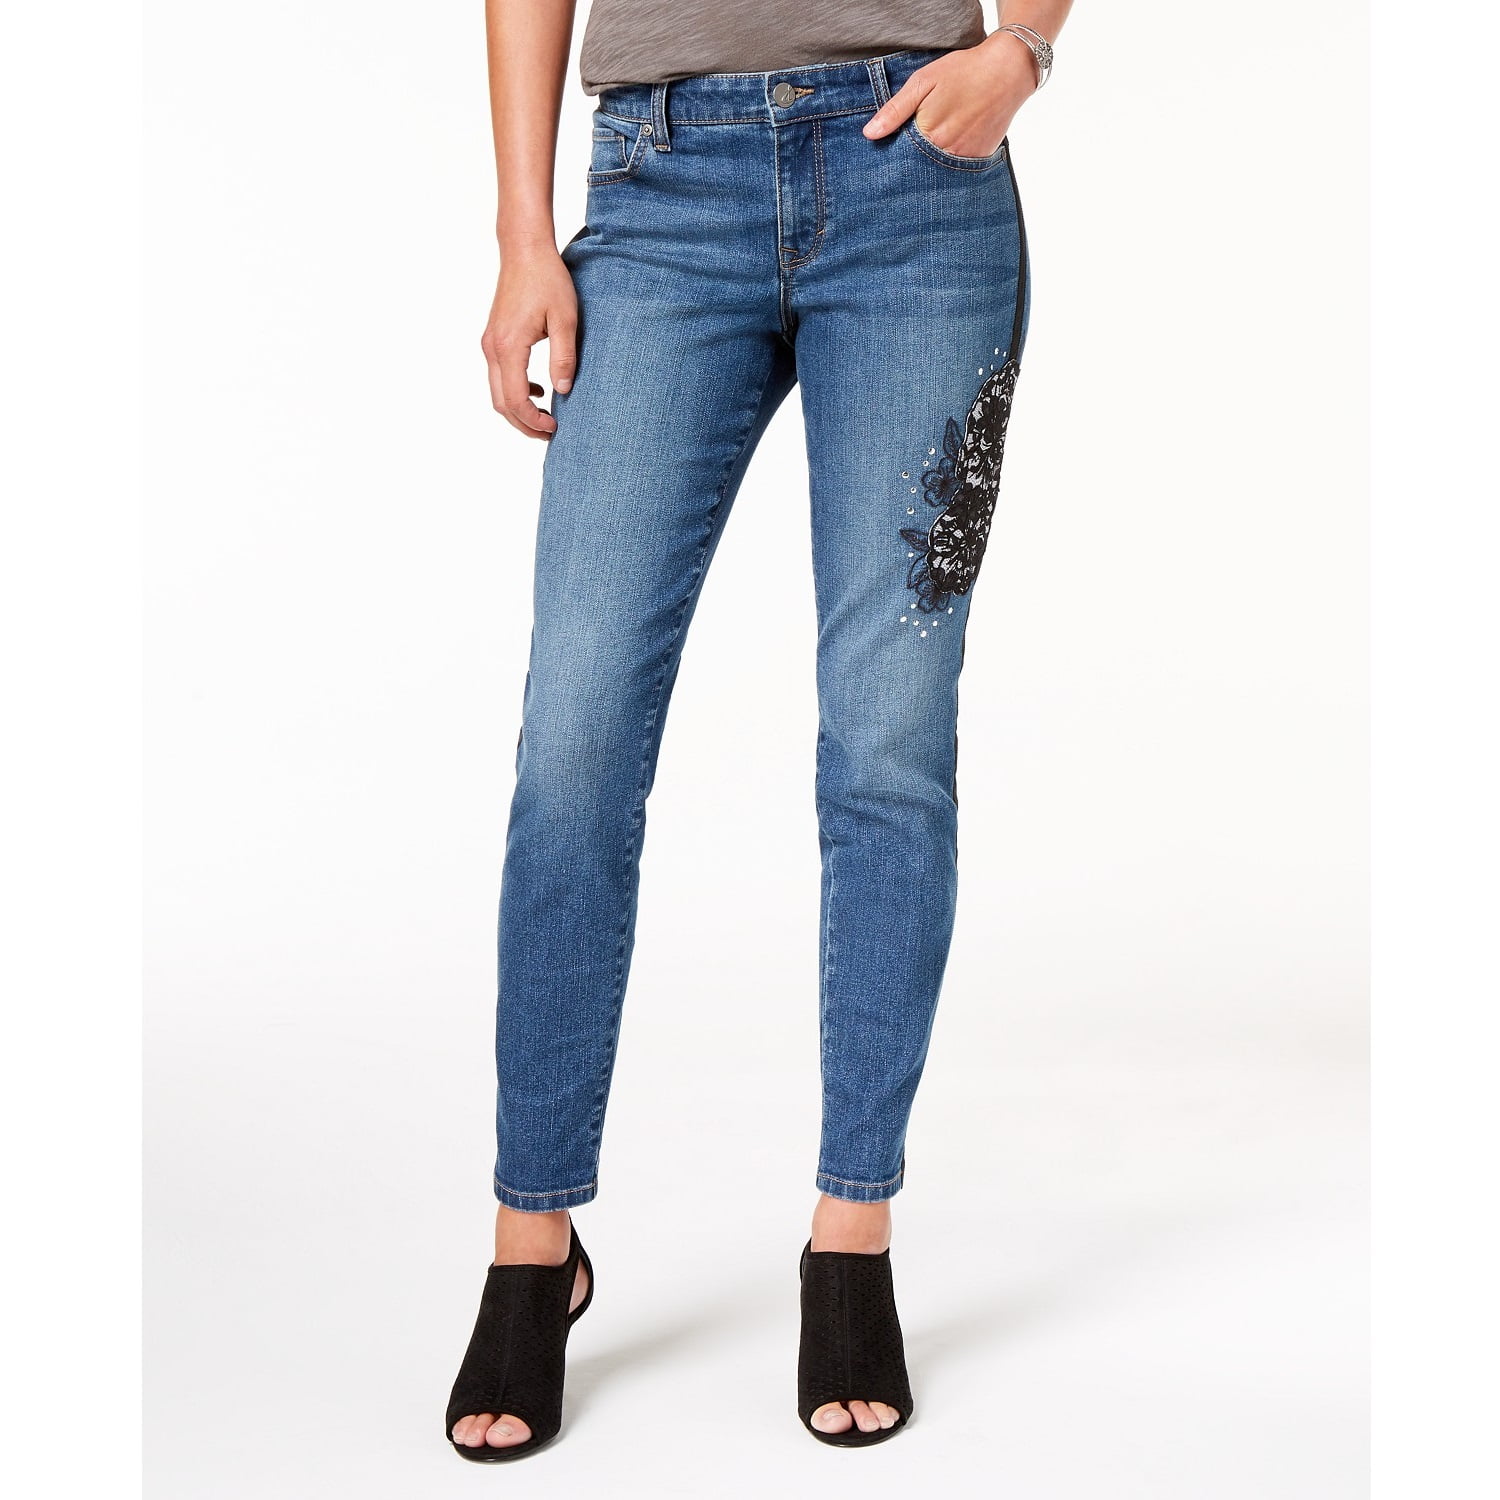 Style & Co Women's Lace Detail Studded Jeans Uptown Size 14 - Walmart.com